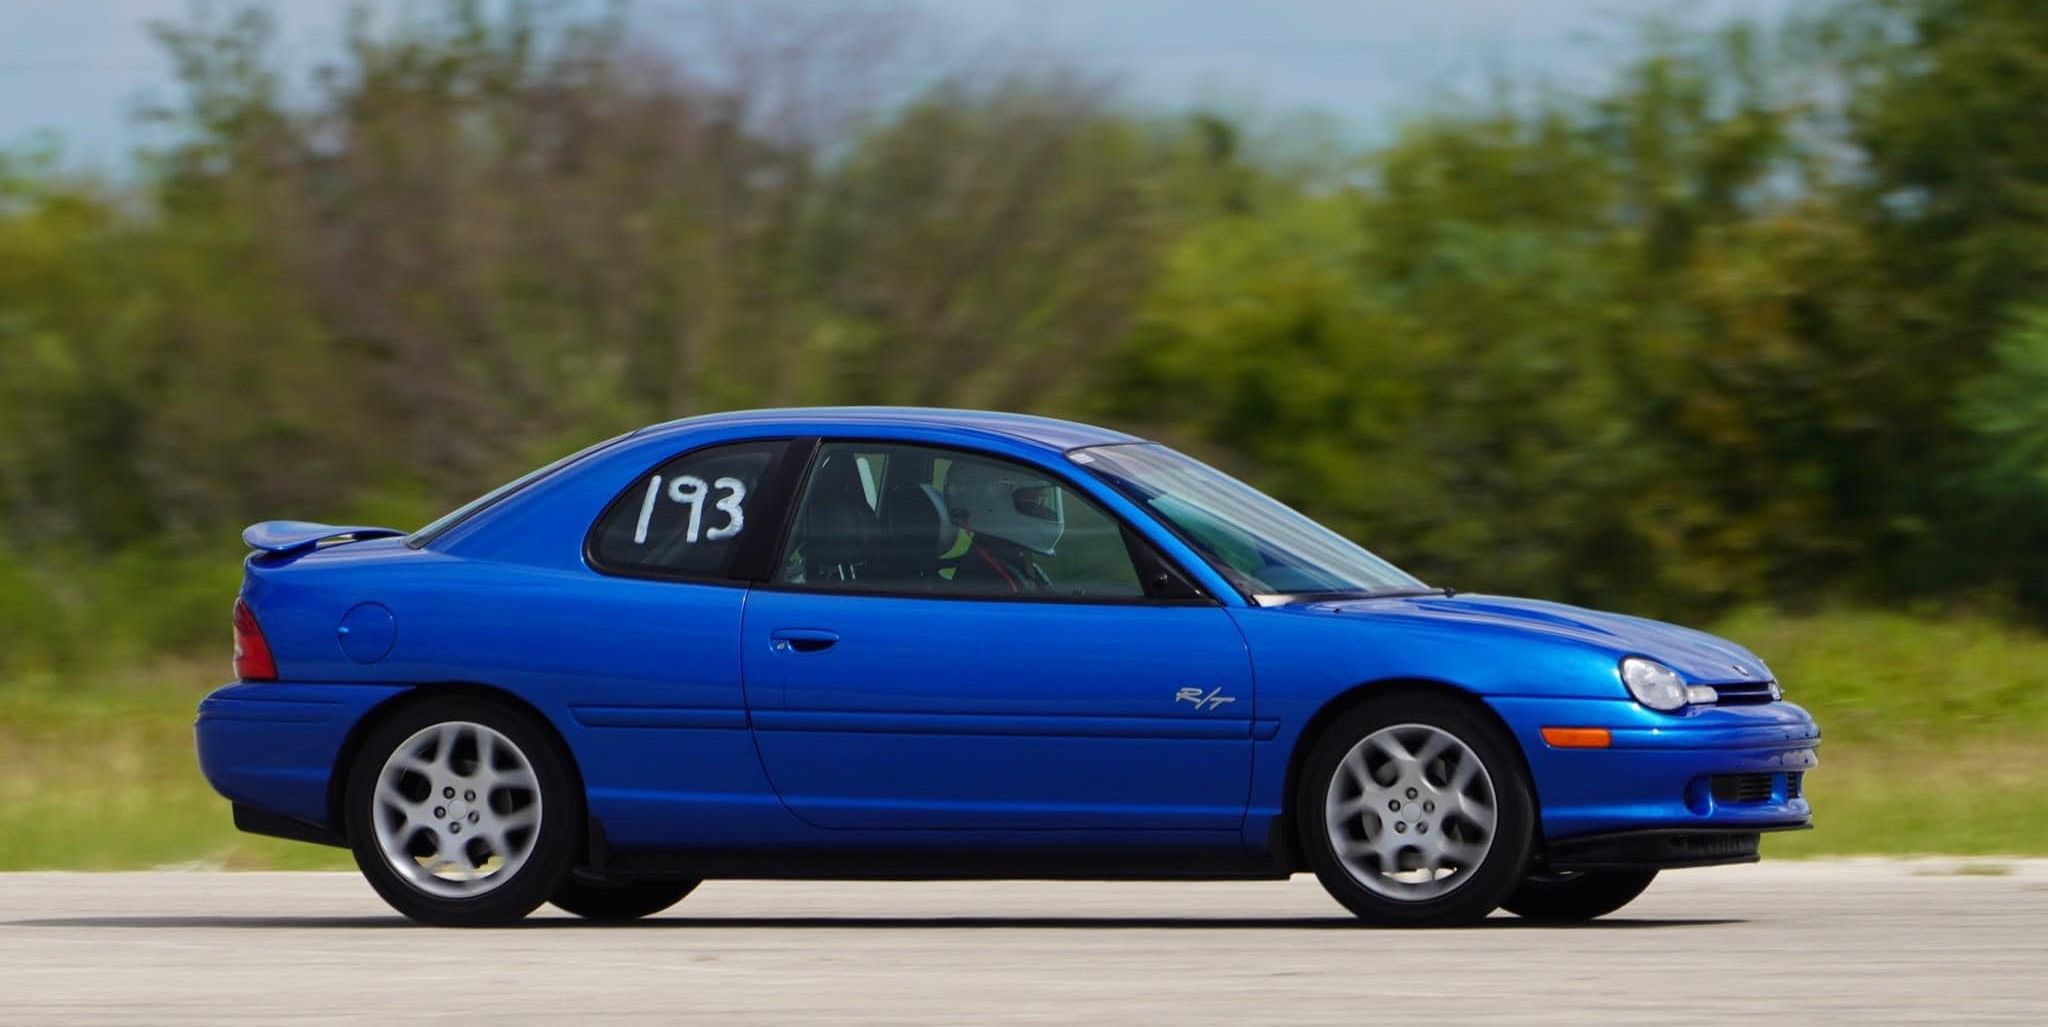 This Is a 200-MPH Dodge Neon